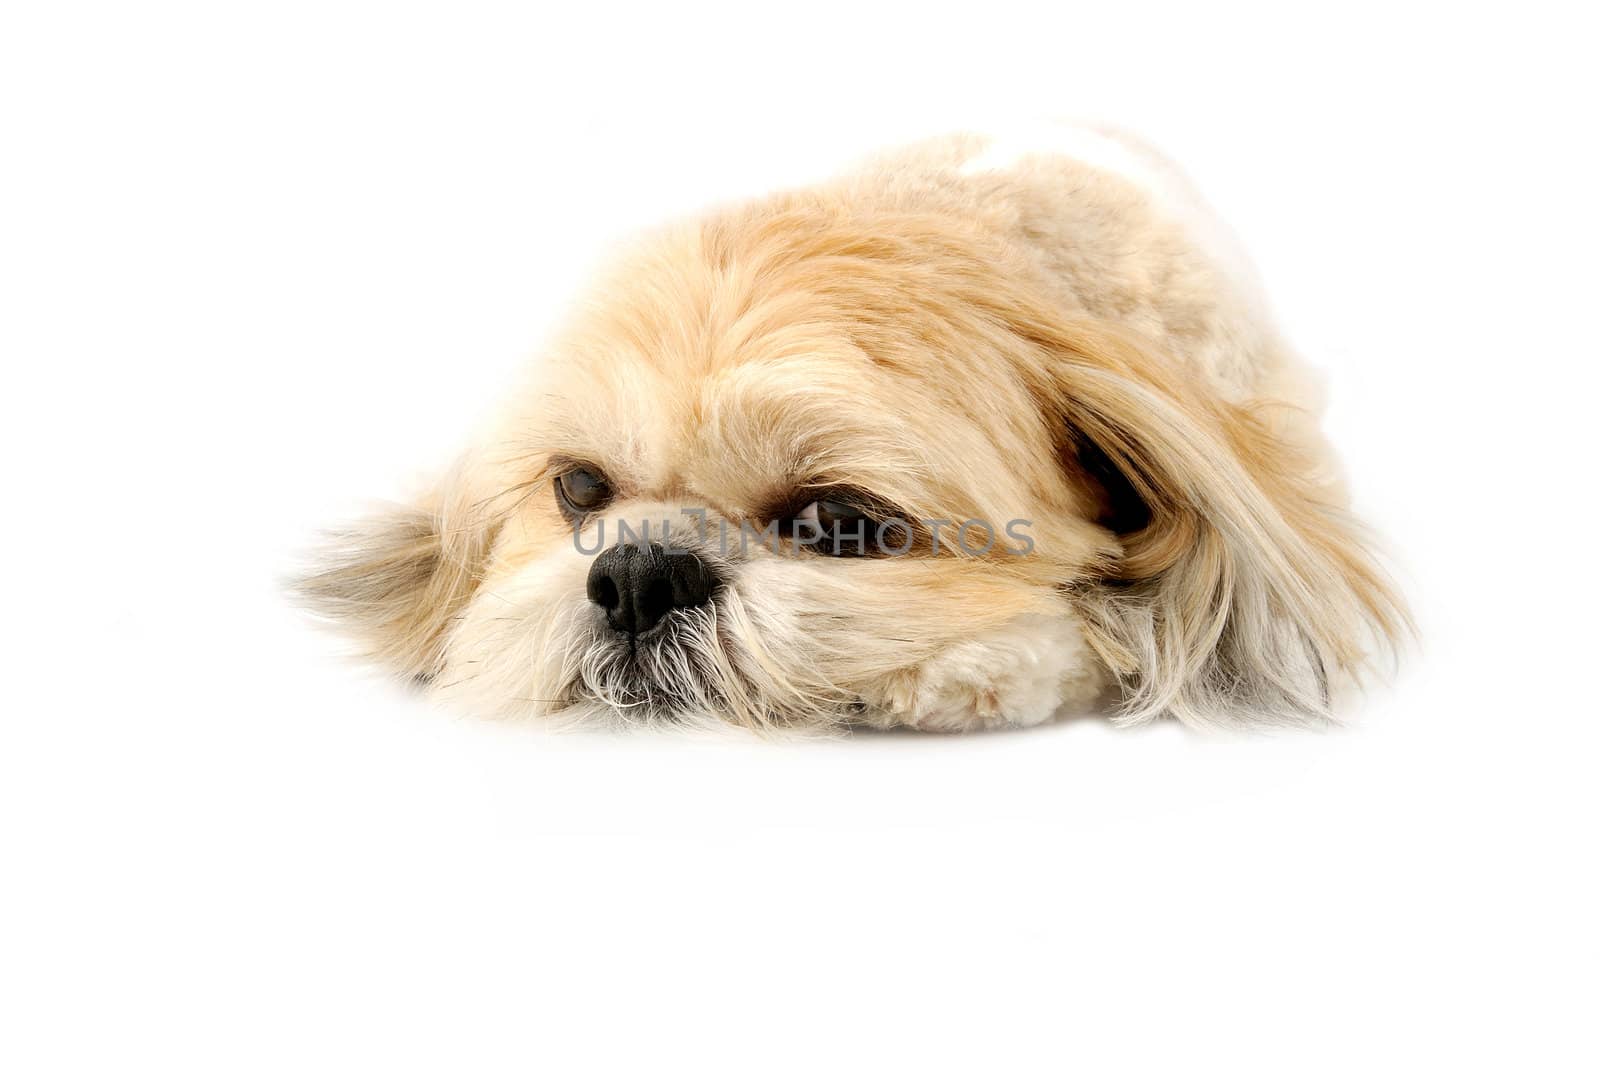 Image of a very cute Lhasa with puppy eyes on a white background